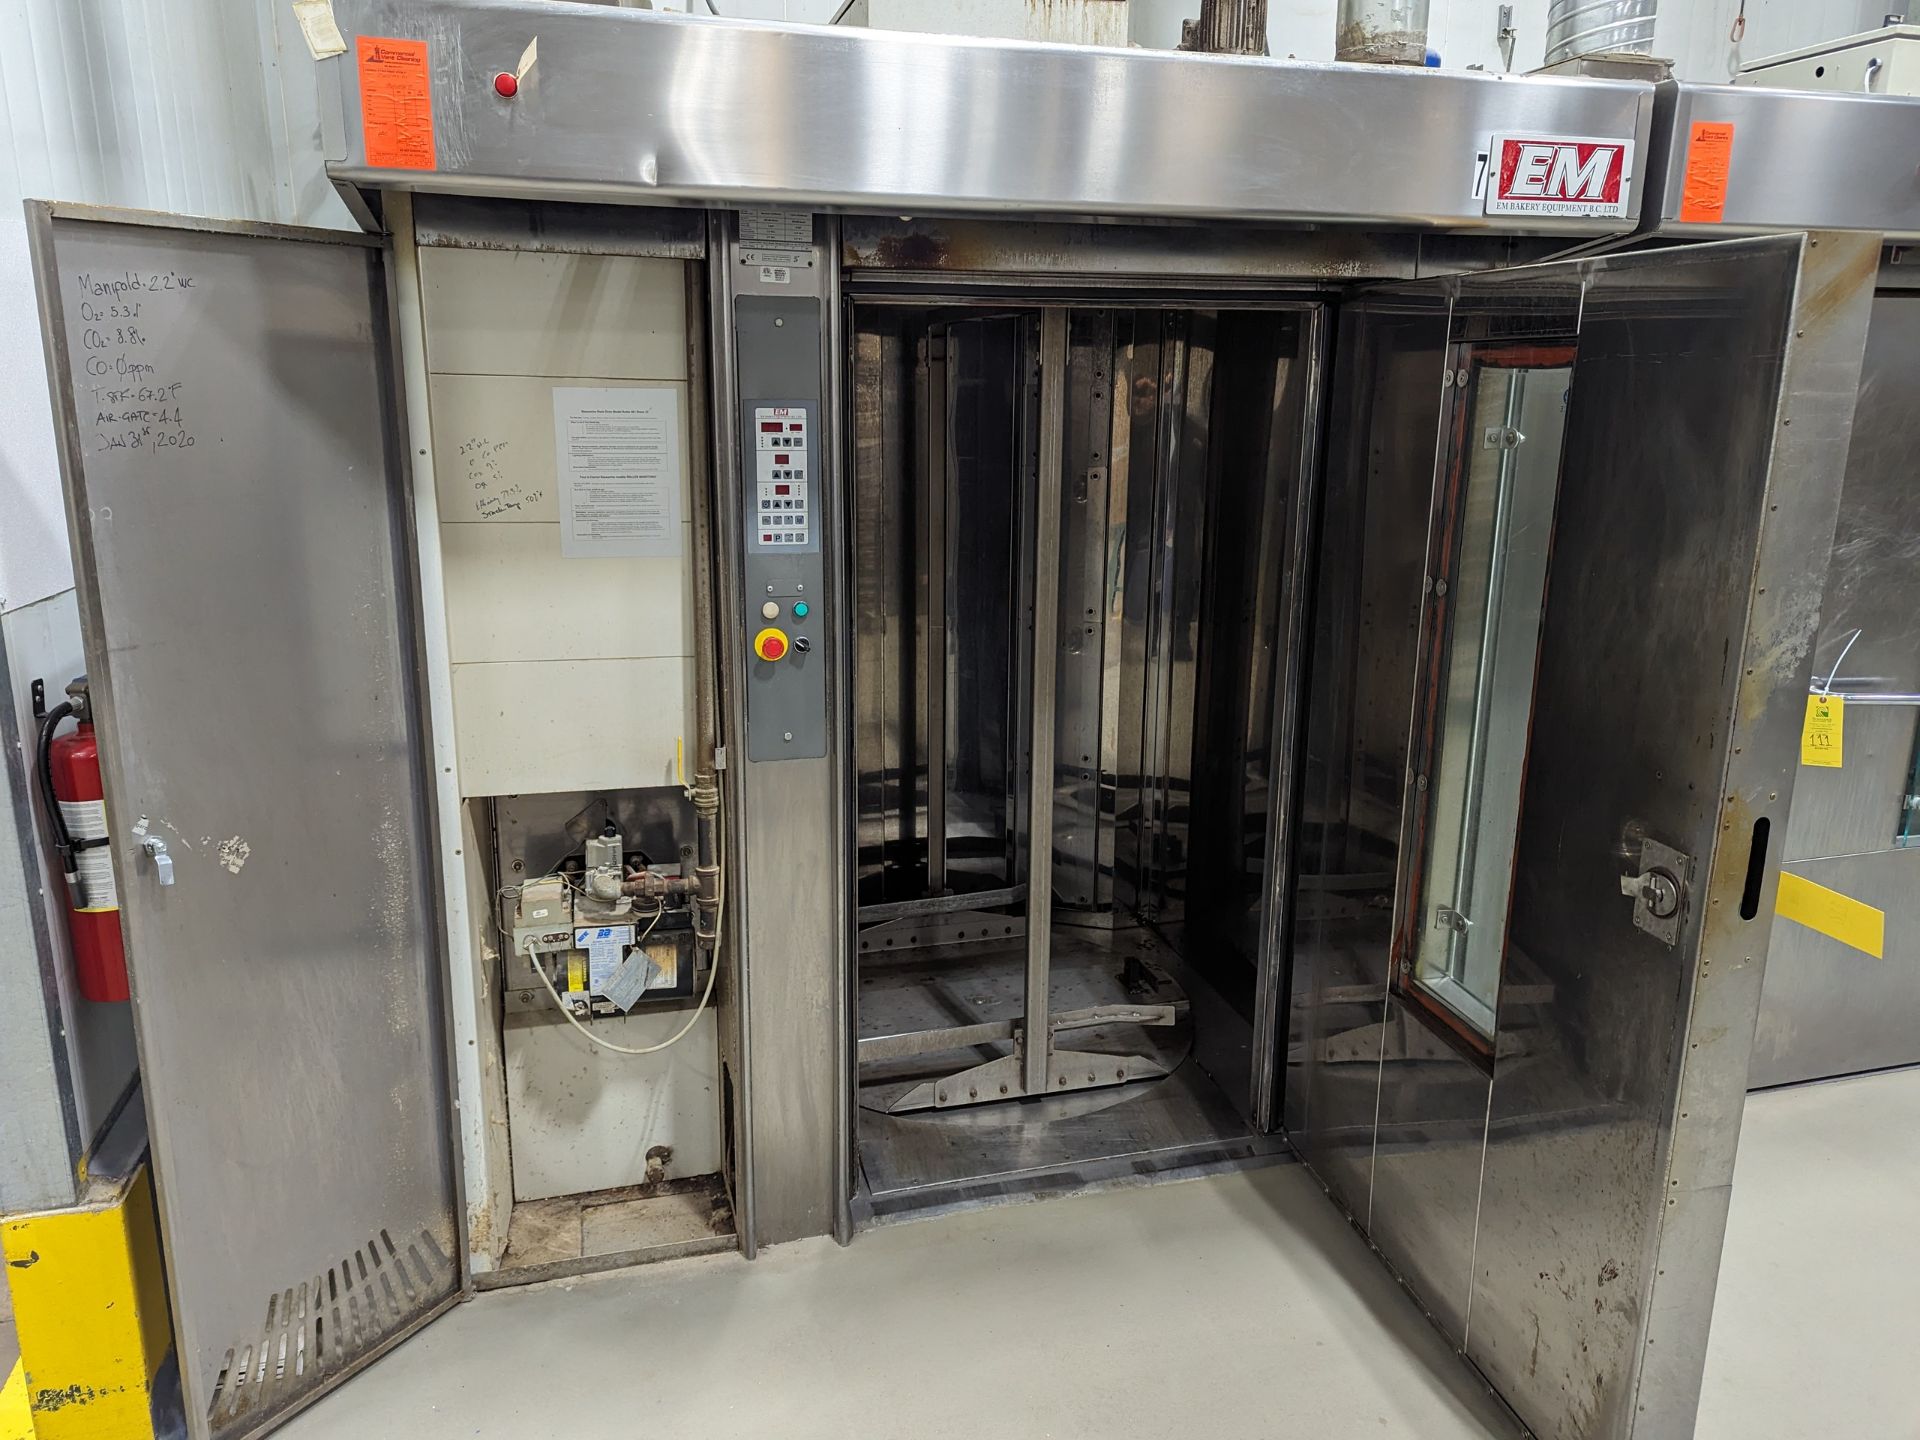 Bassanina Roller Oven, Dimensions LxWxH: 86x72x100 - Image 3 of 4